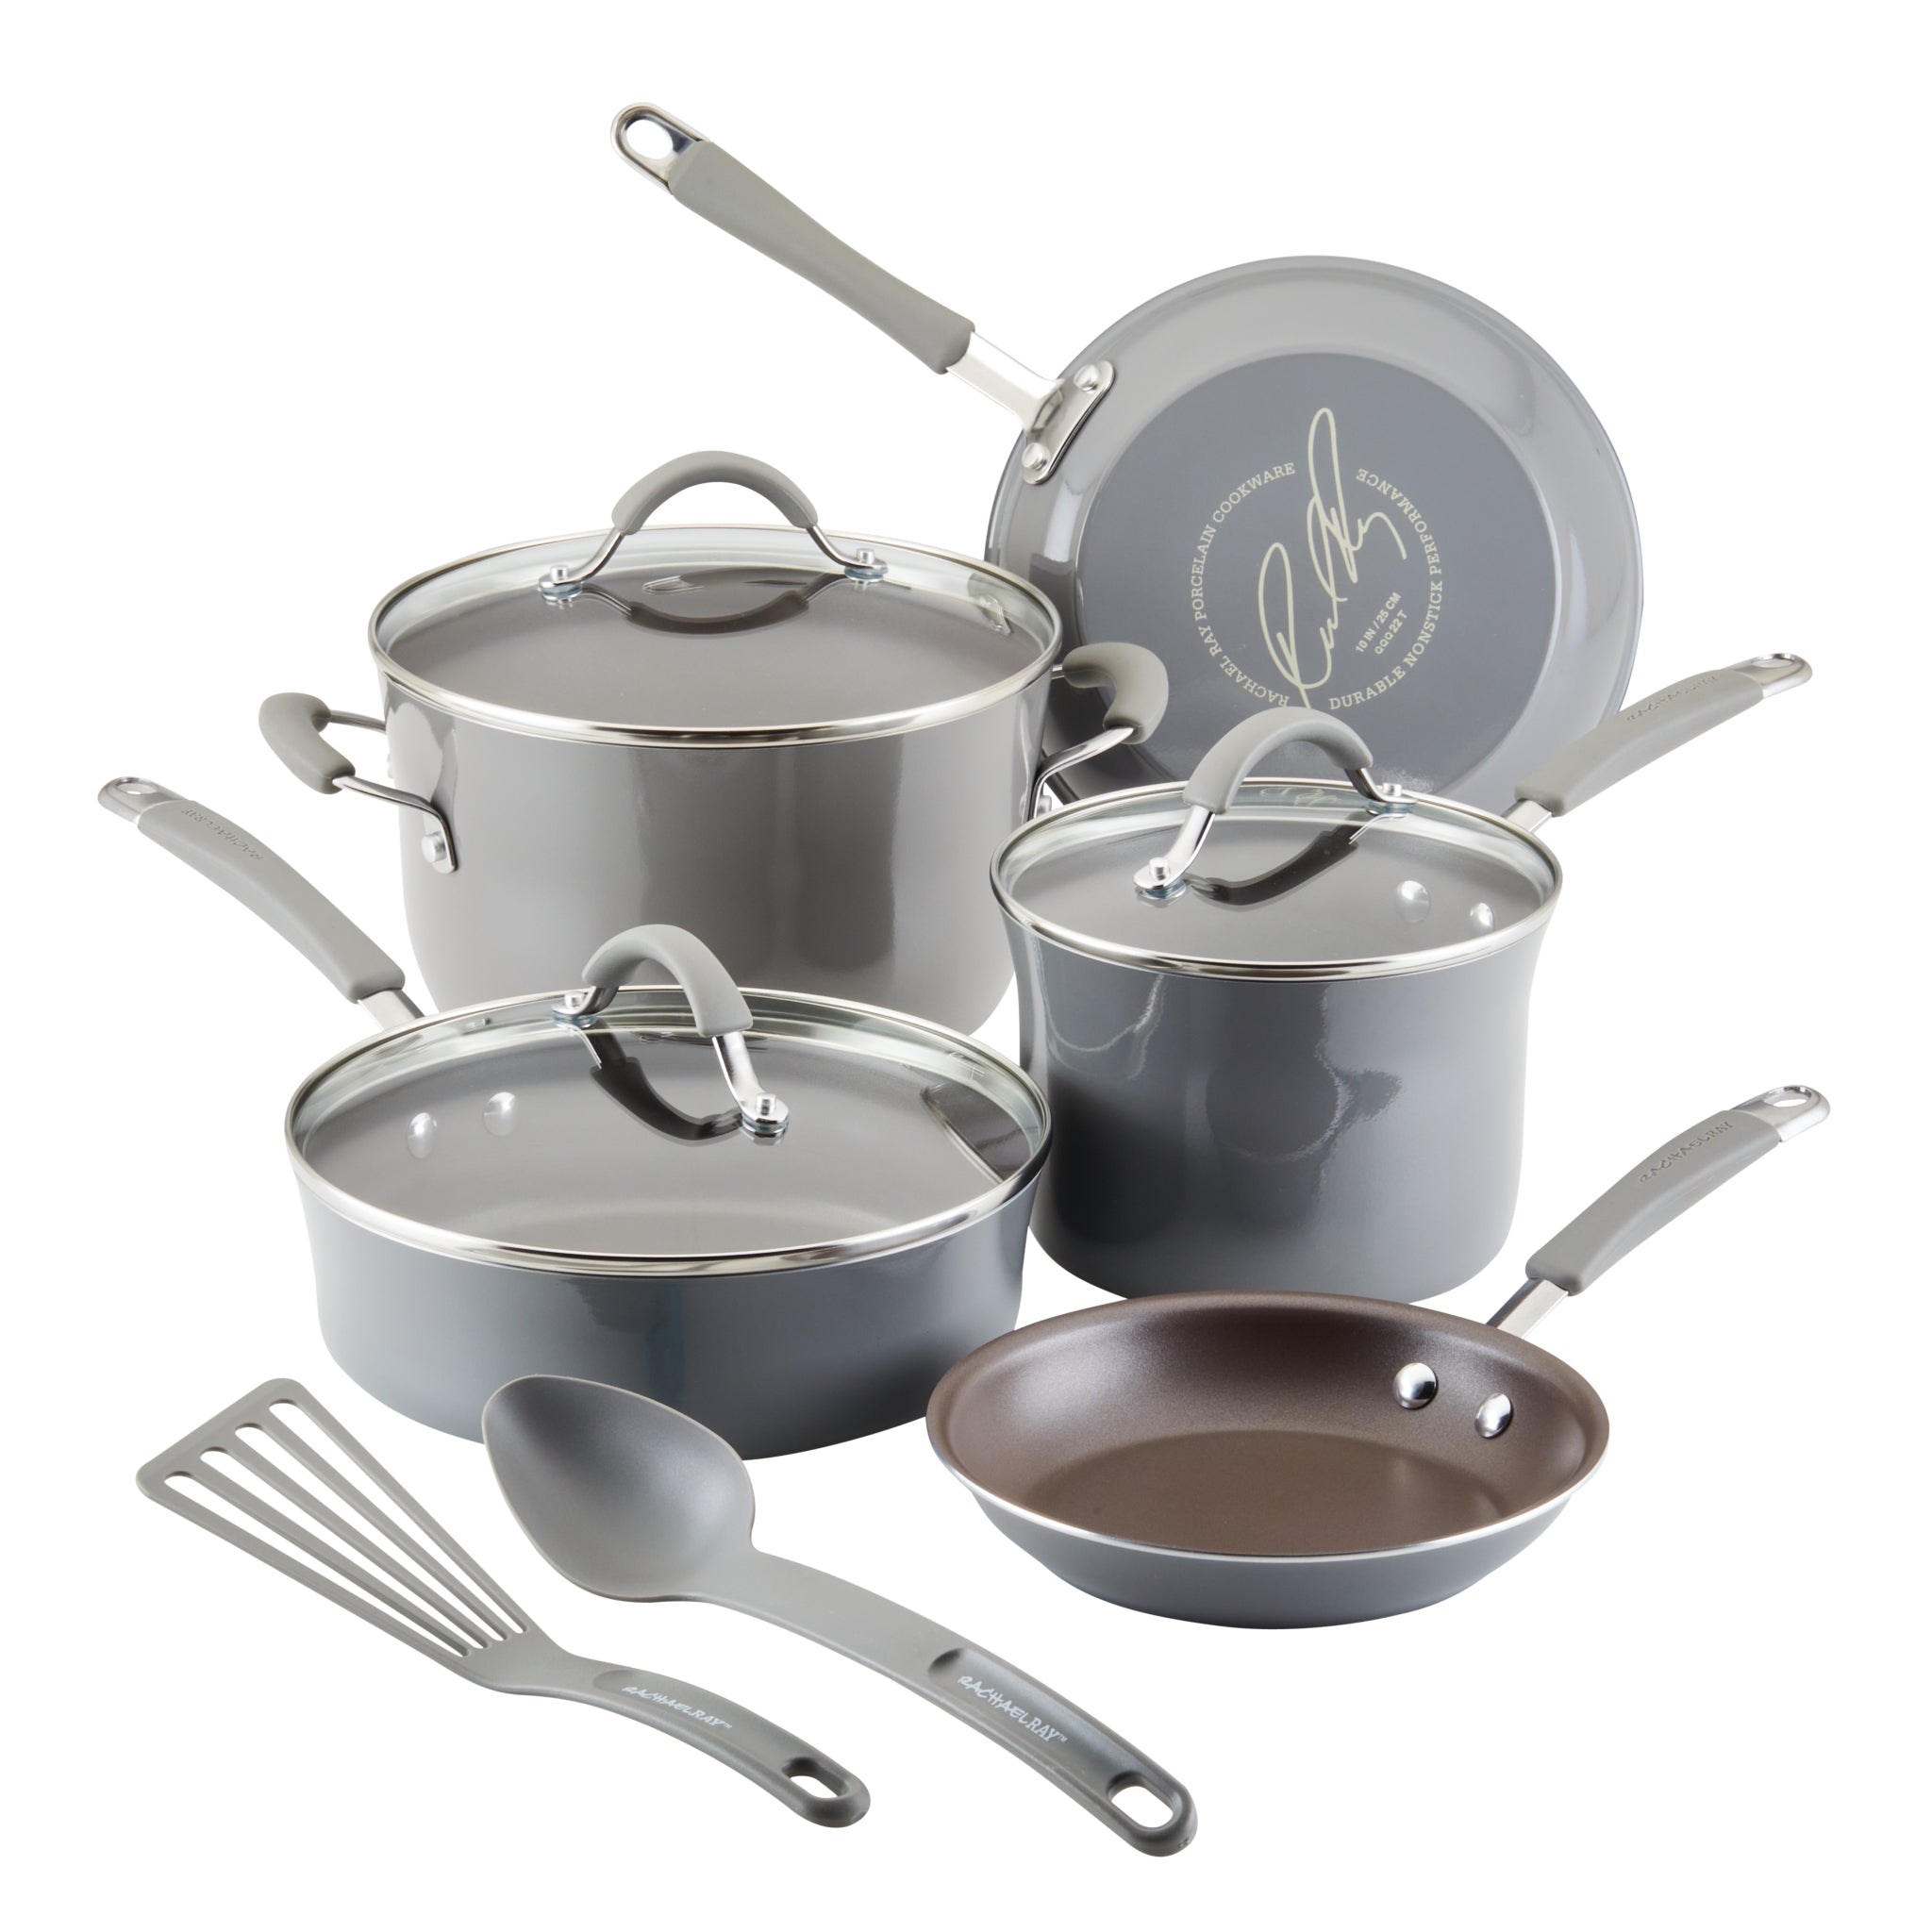 Rachael Ray Create Delicious 10-Piece Cookware Set in Stainless